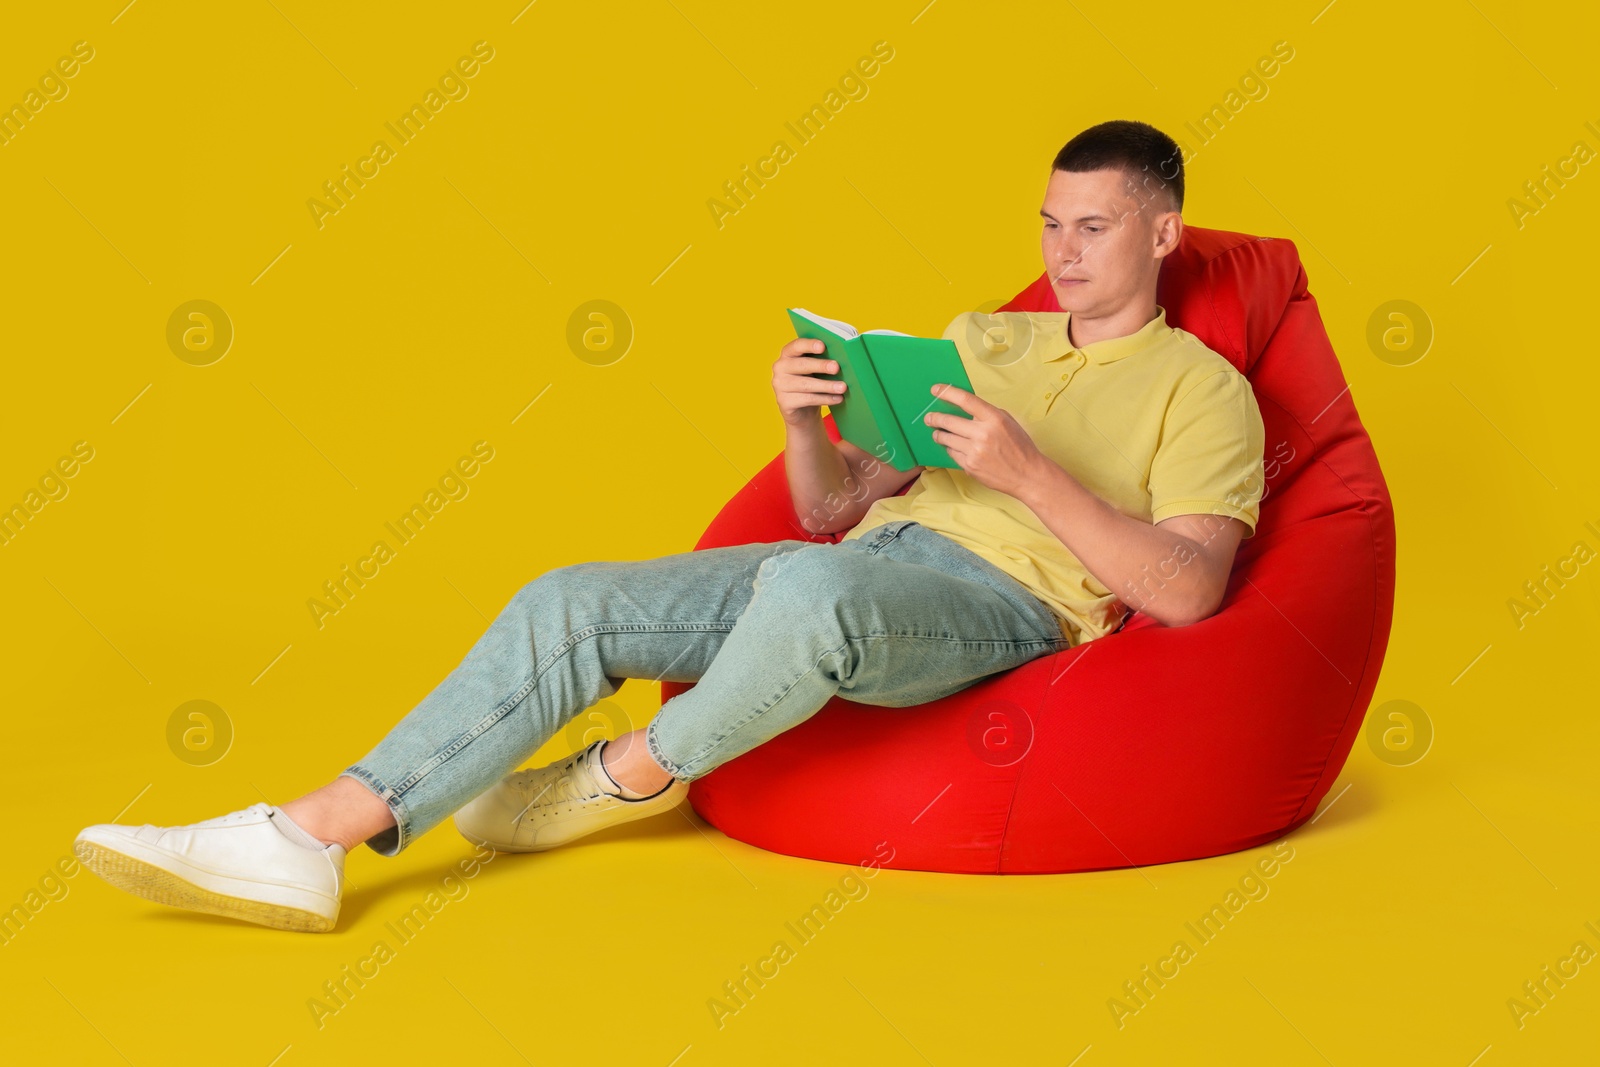 Photo of Handsome man reading book on red bean bag chair against yellow background